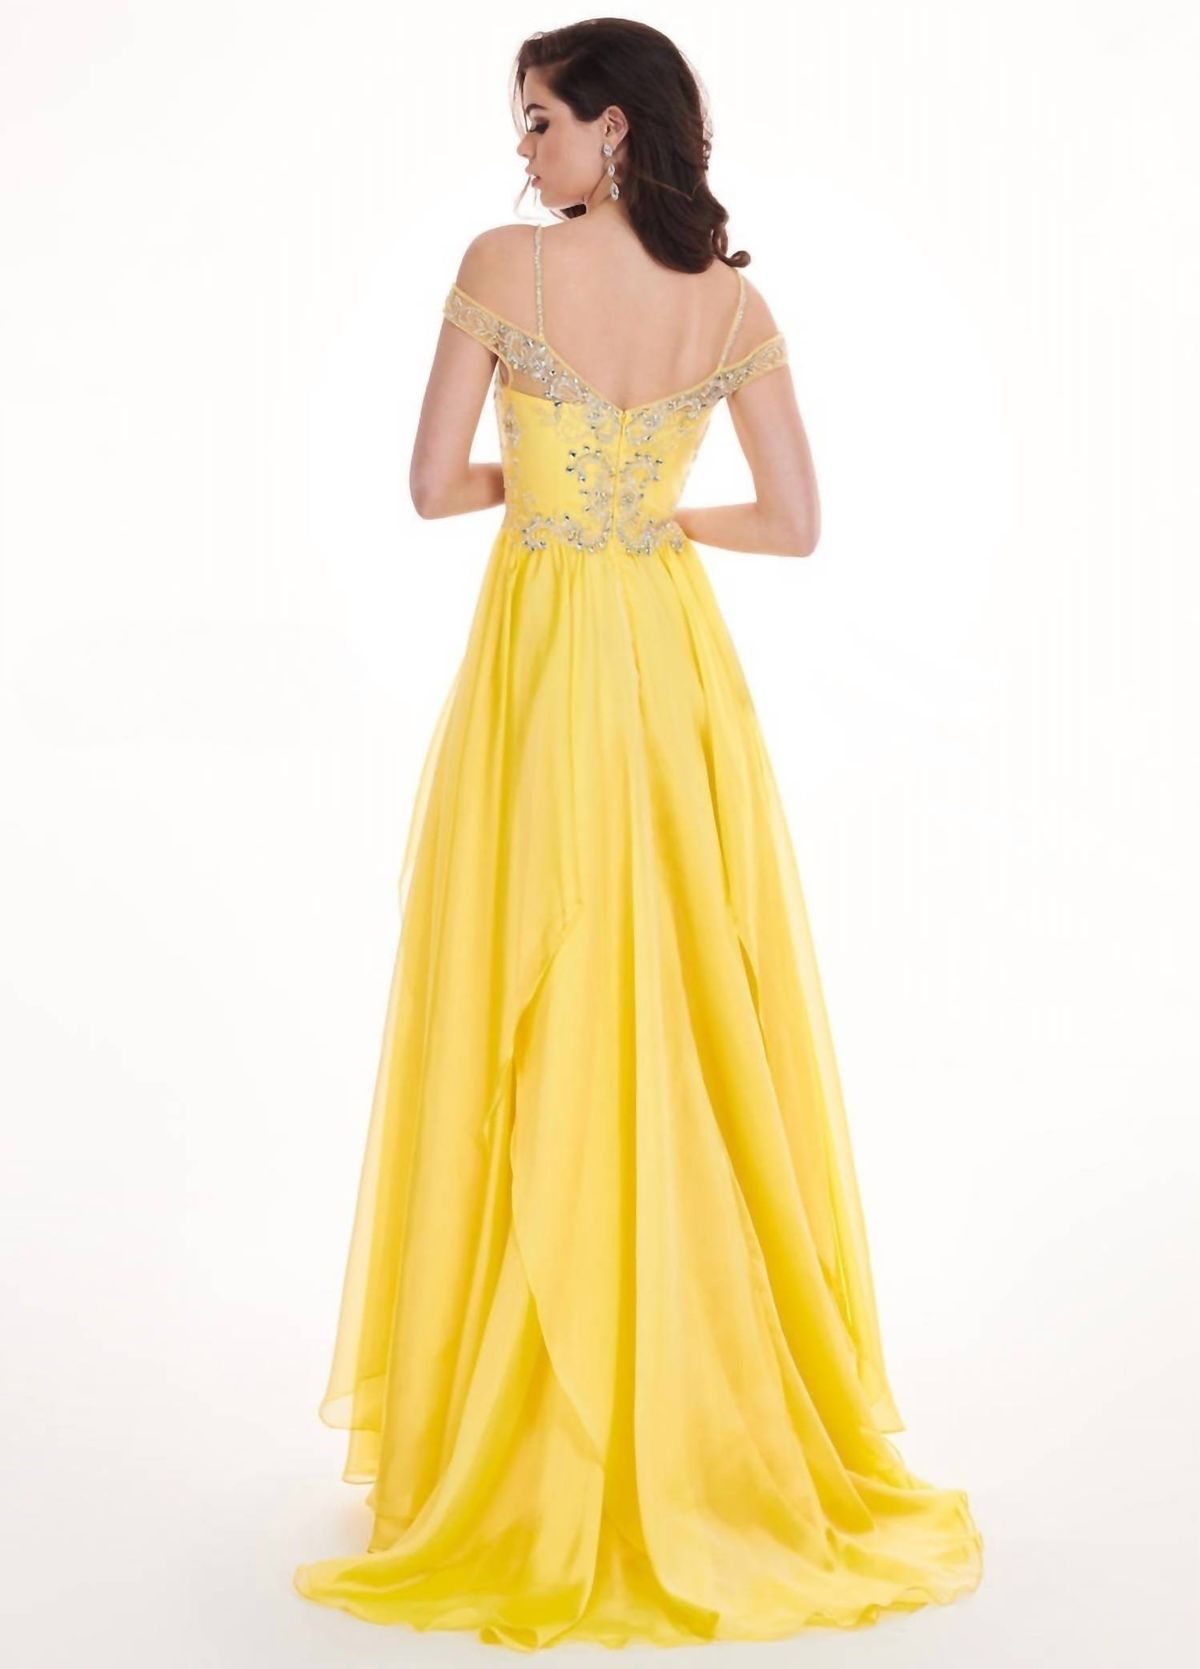 Style 1-3671306520-98 RACHEL ALLAN Size 10 Prom Yellow A-line Dress on Queenly